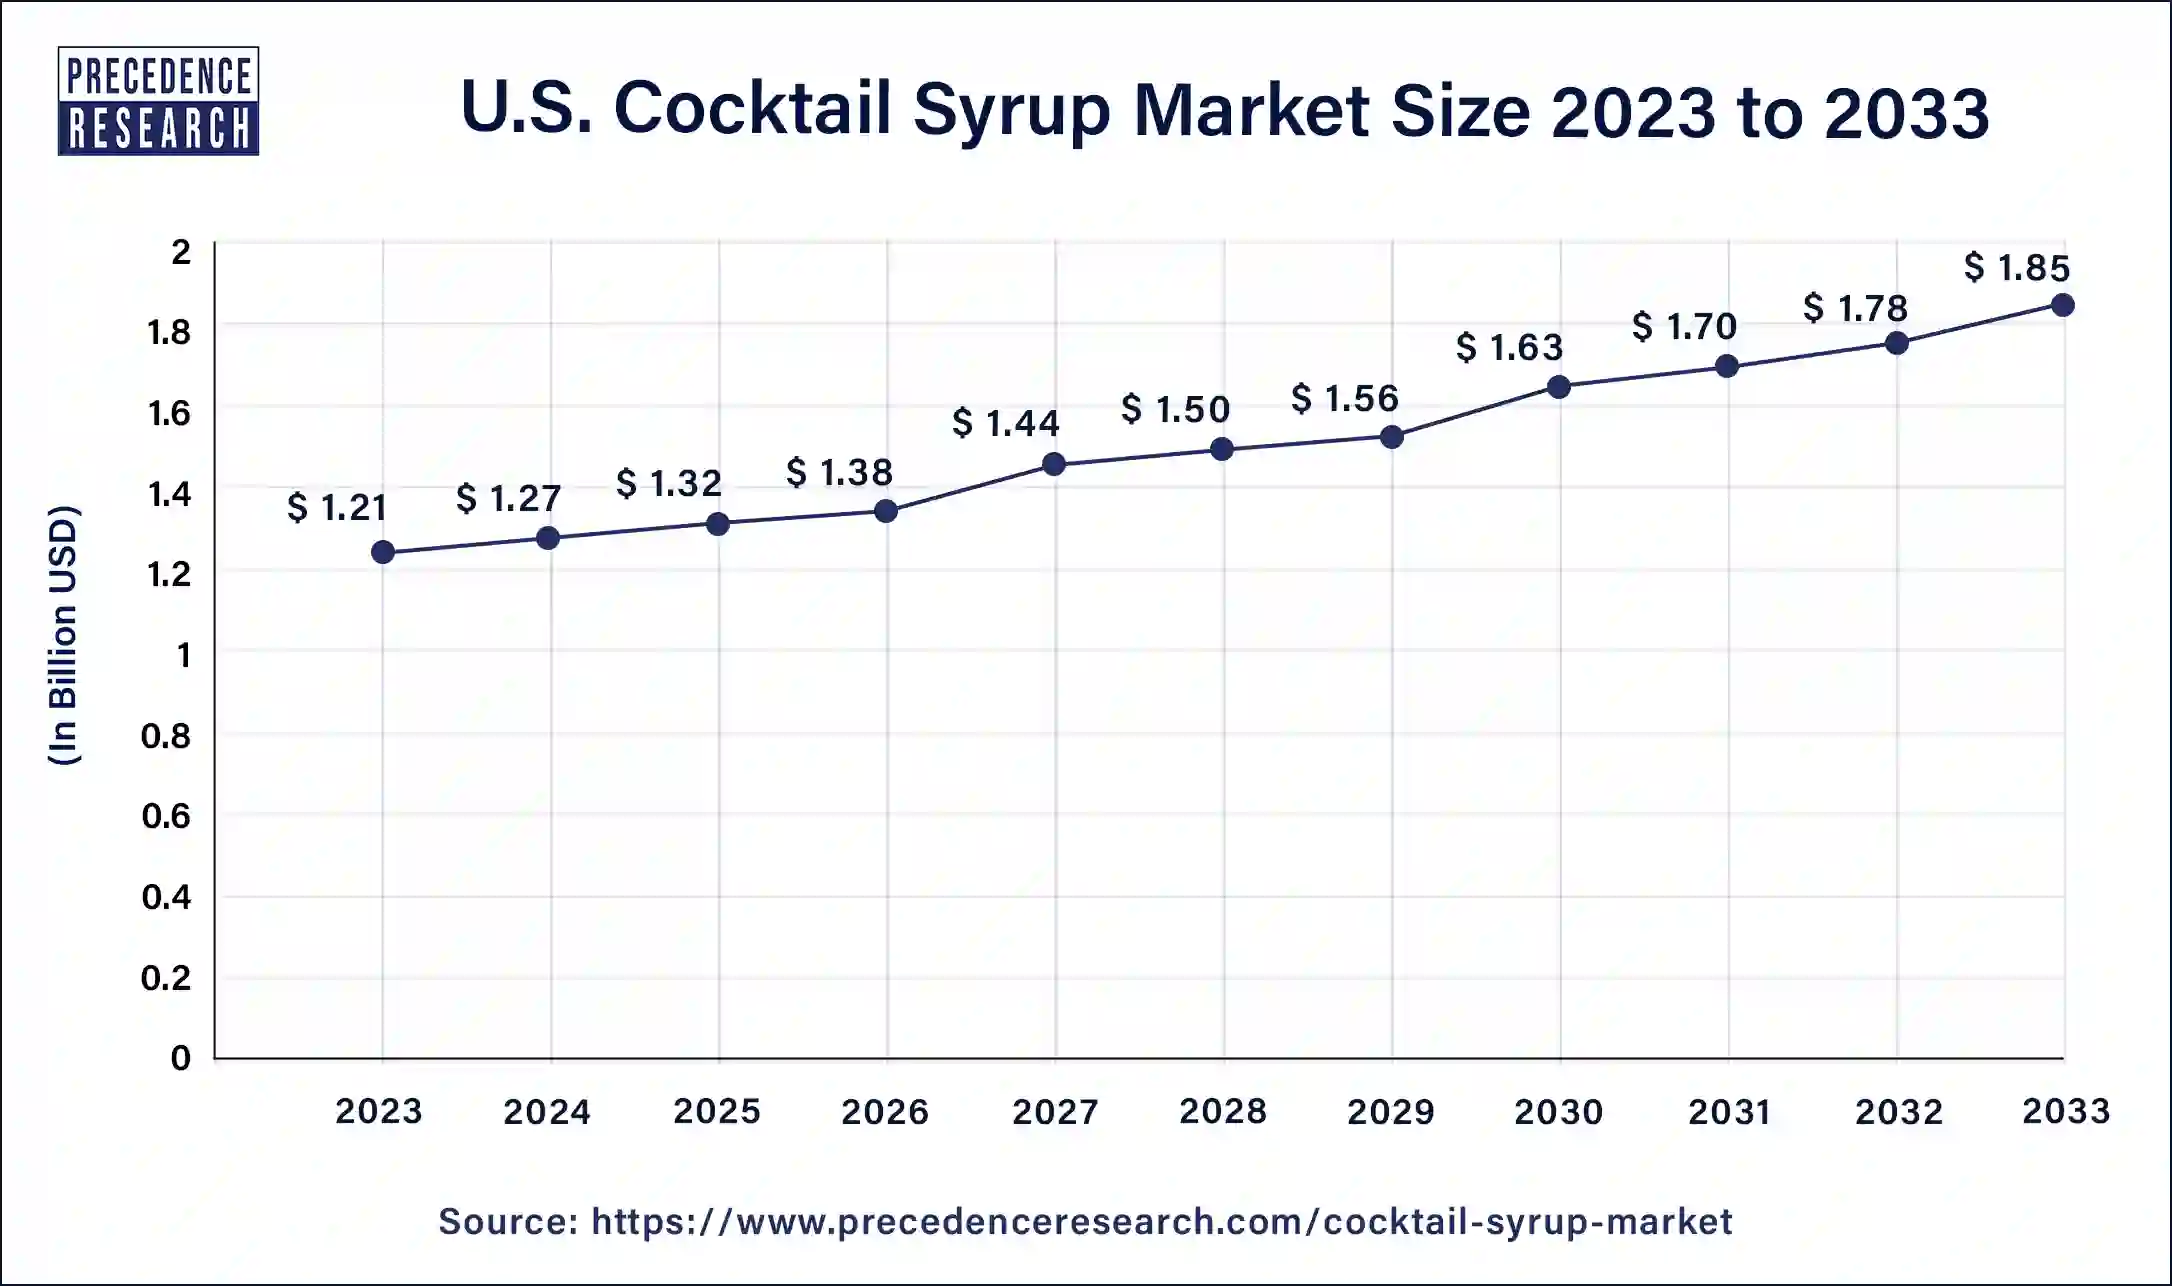 U.S. Cocktail Syrup Market Size 2024 to 2033